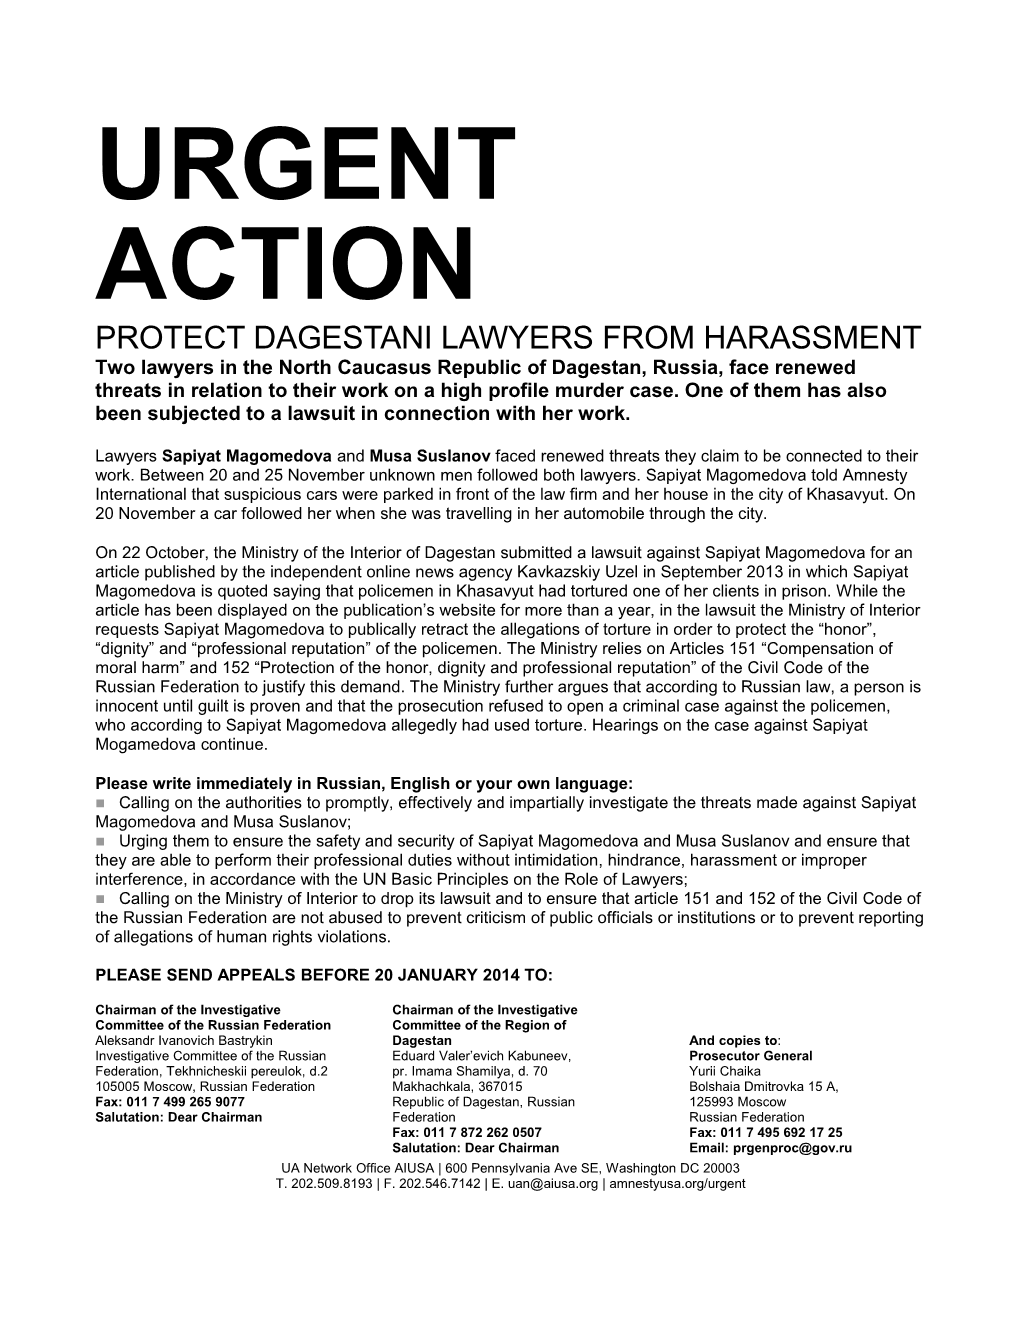 Protect Dagestani Lawyers from Harassment